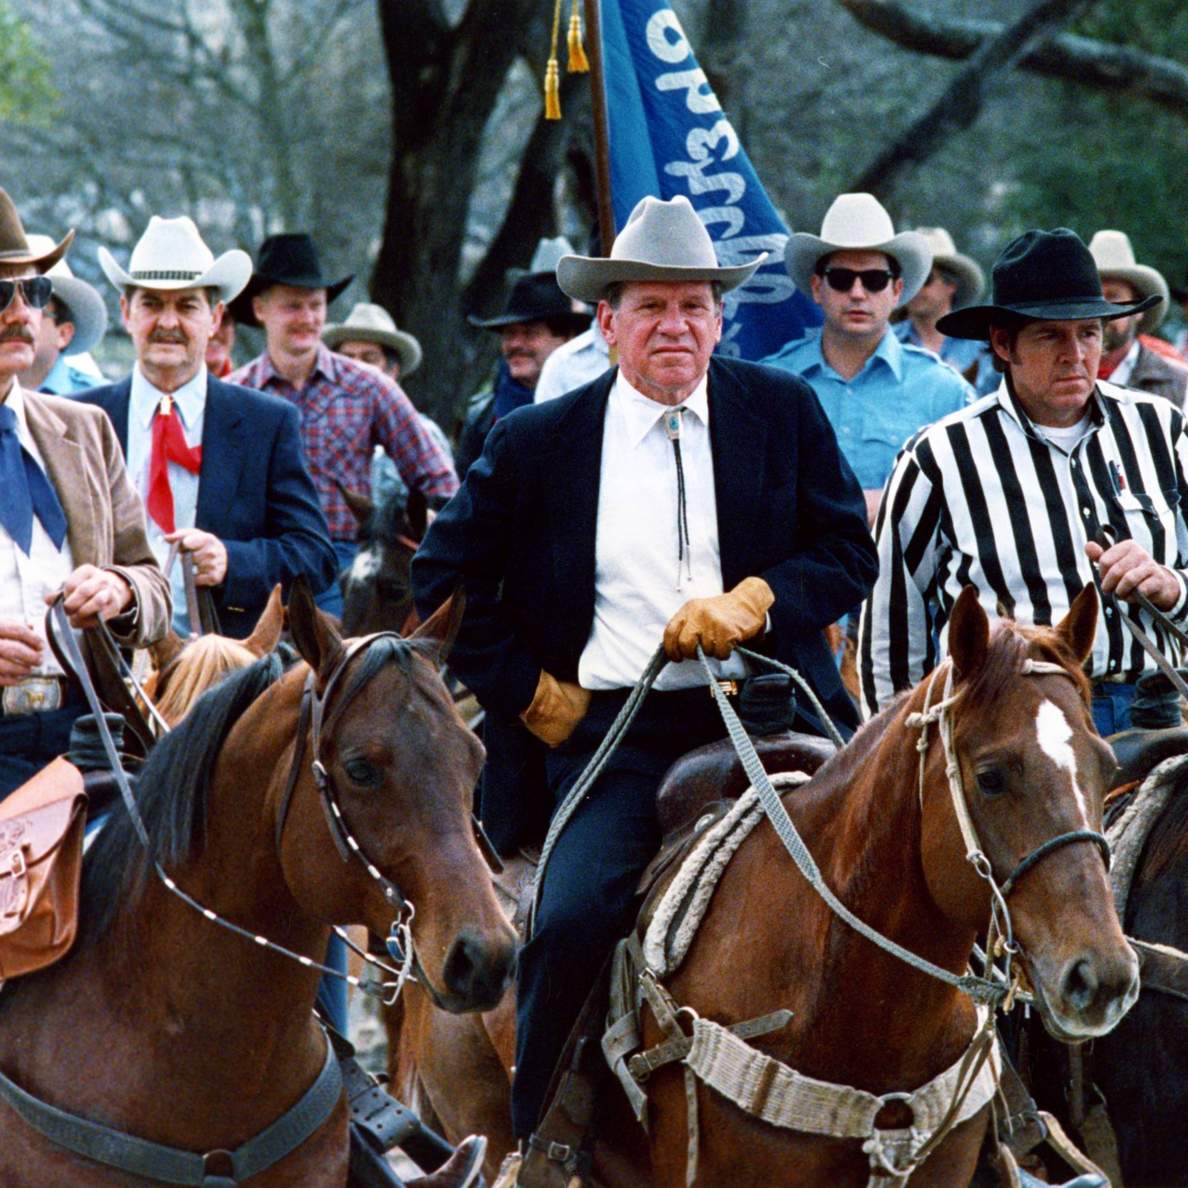 Bill Hobby and Rodeo riders (Probably in Austin)